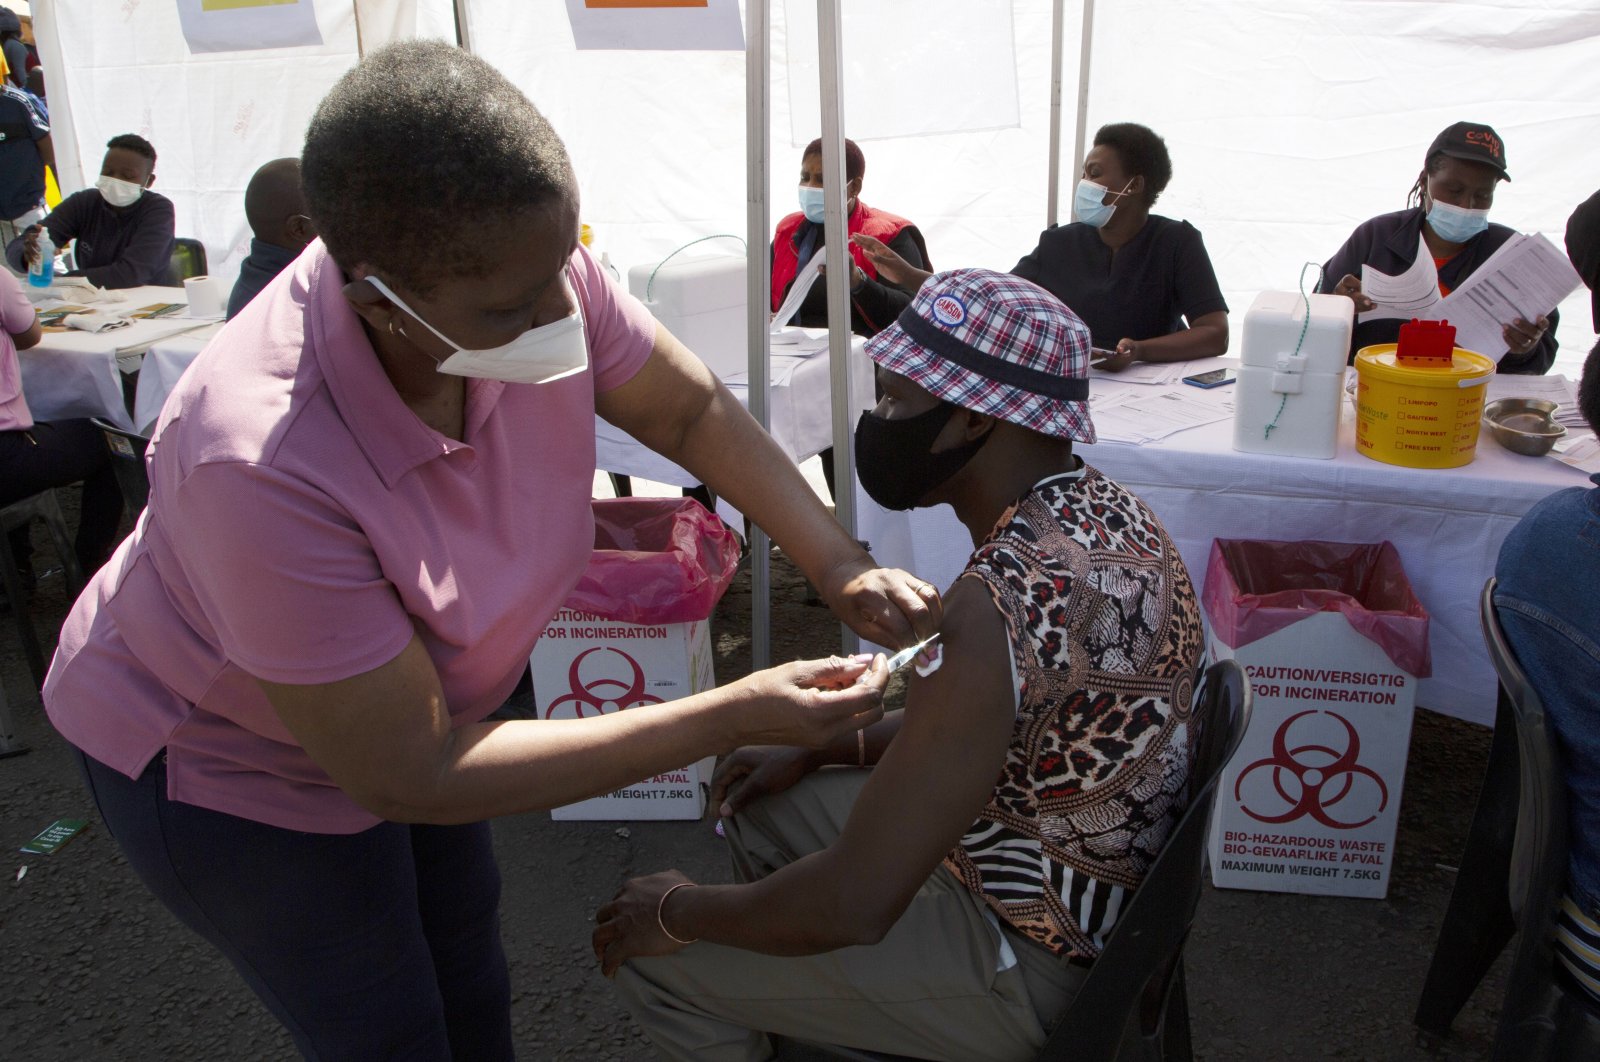 A patient receives Johnson & Johnson's Janssen COVID-19 vaccine at a pop-up vaccination center, at the Bare taxi rank in Soweto, South Africa, Aug. 20, 2021. (AP Photo)